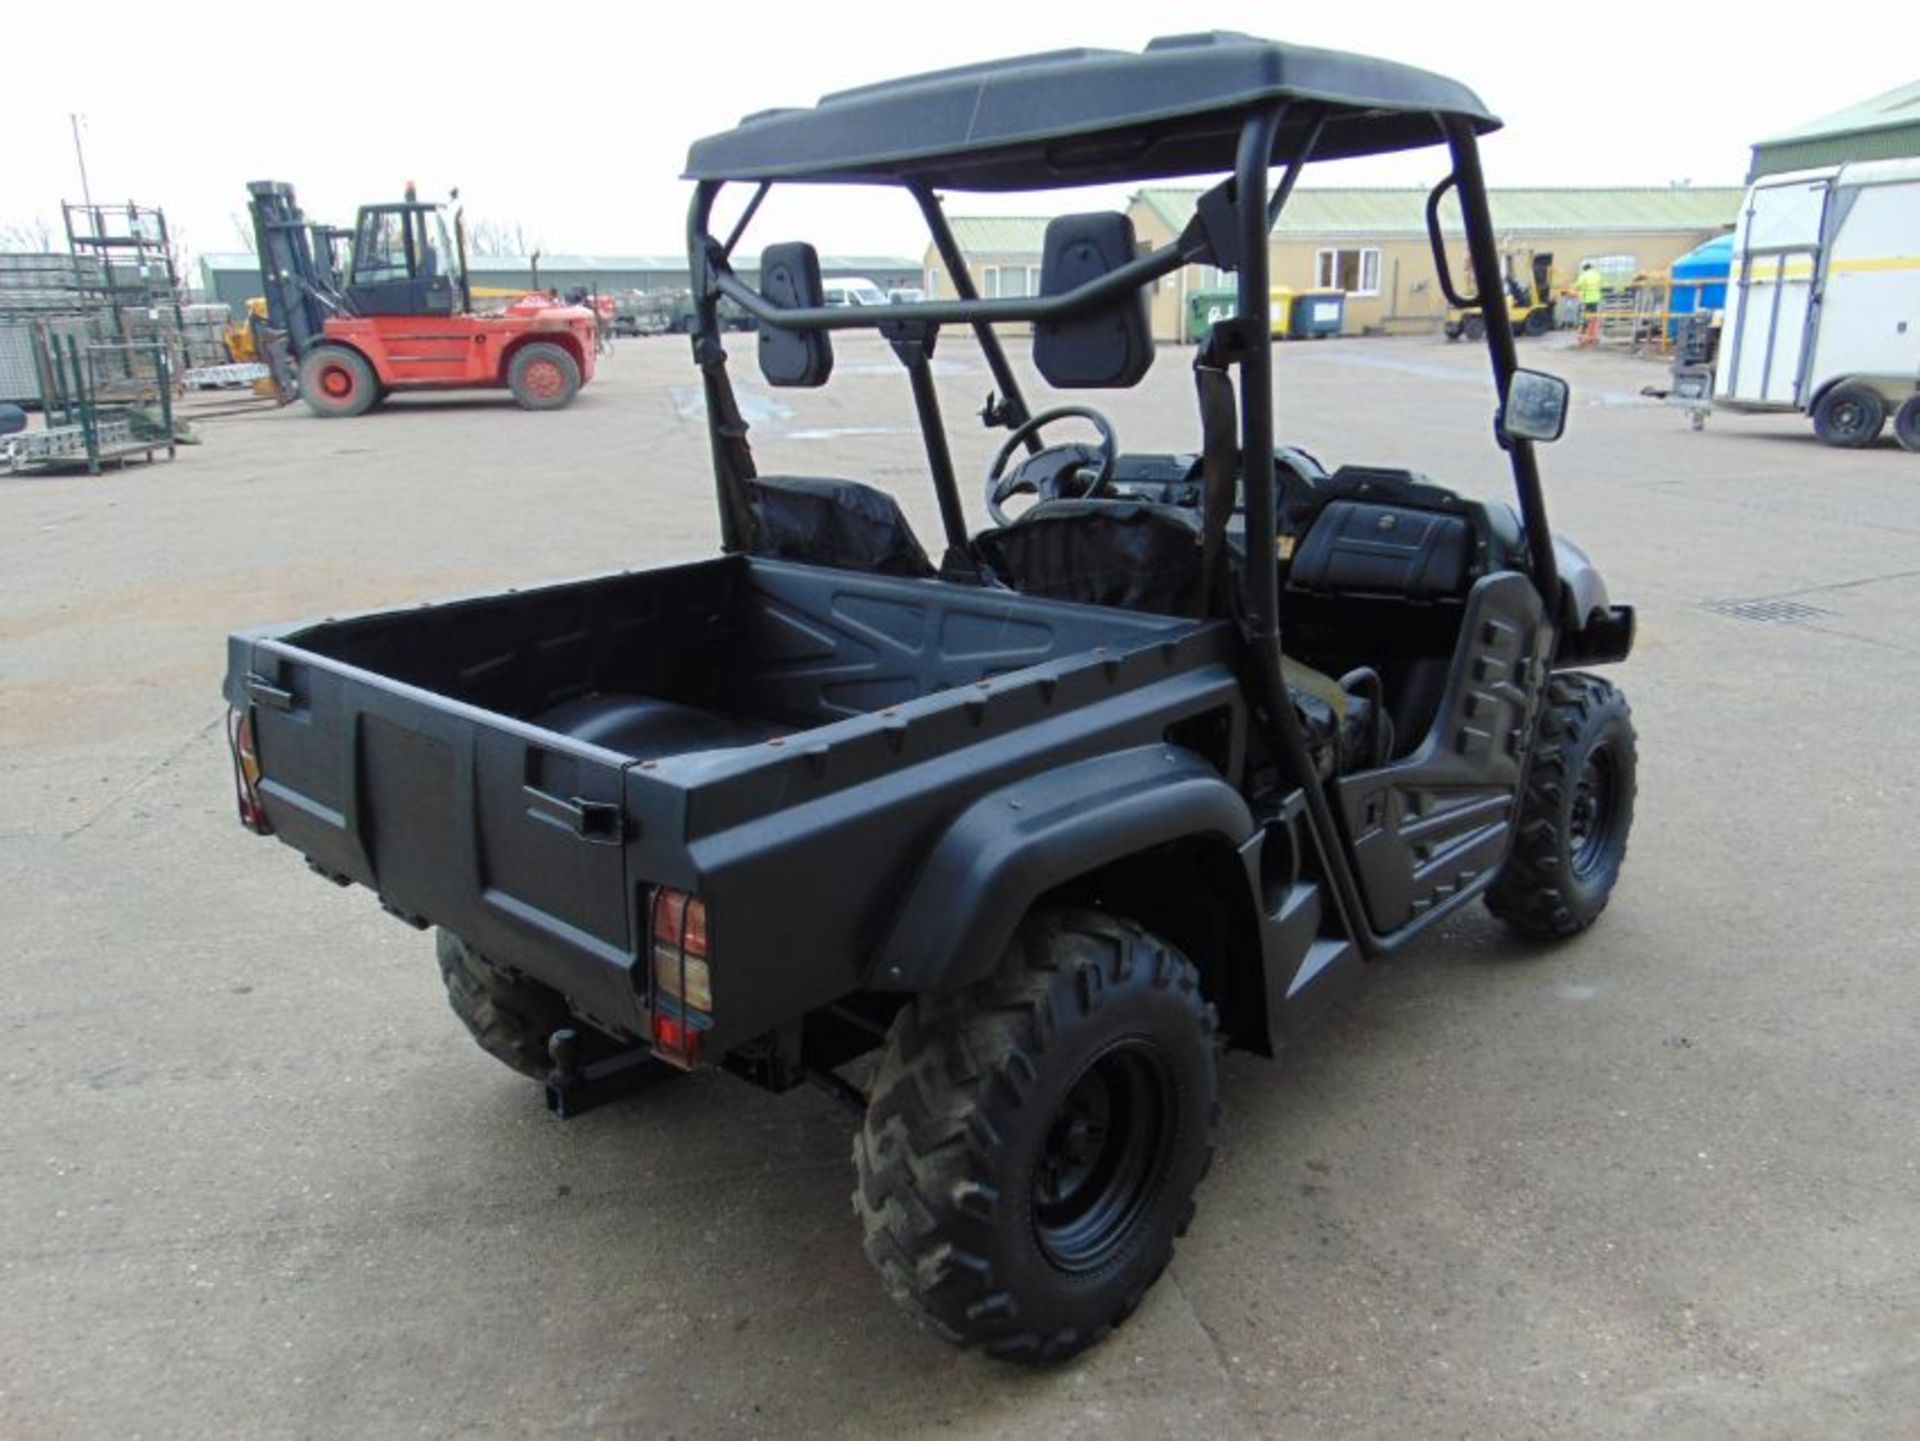 FARR 700 EFI Utility Vehicle ONLY 403 HOURS! - Image 6 of 22